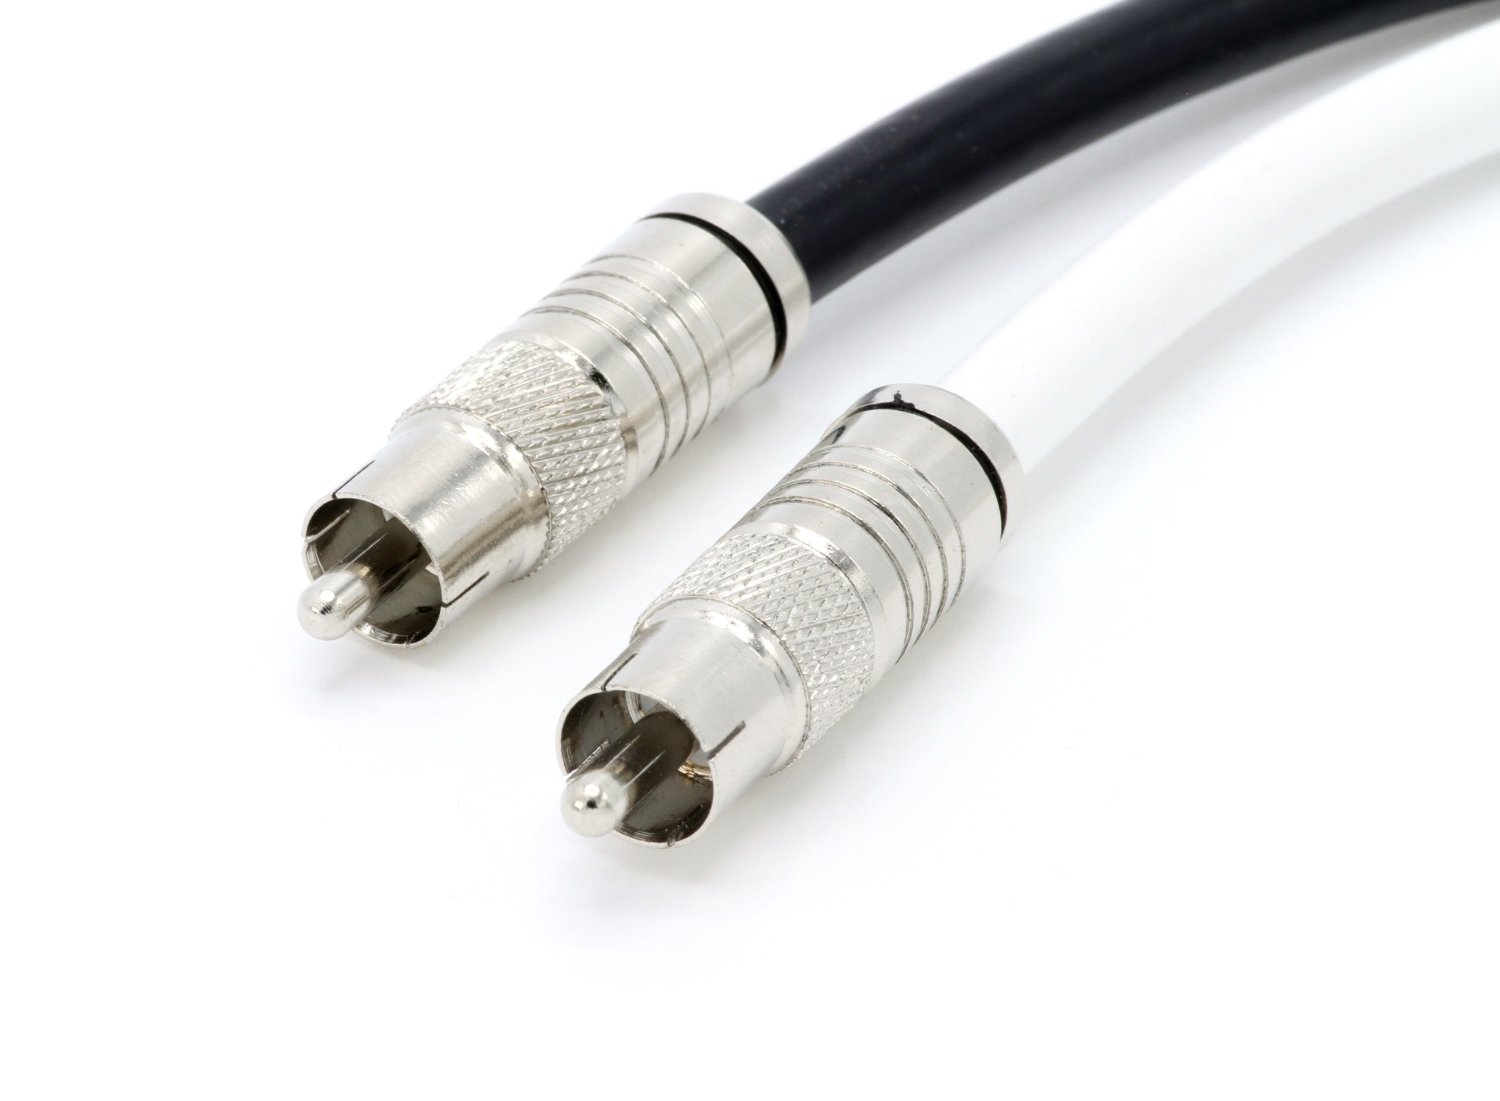 THE CIMPLE CO - Digital Audio Coaxial Cable - Subwoofer Cable - (S/PDIF) RCA Cable, 100 Feet - image 5 of 6